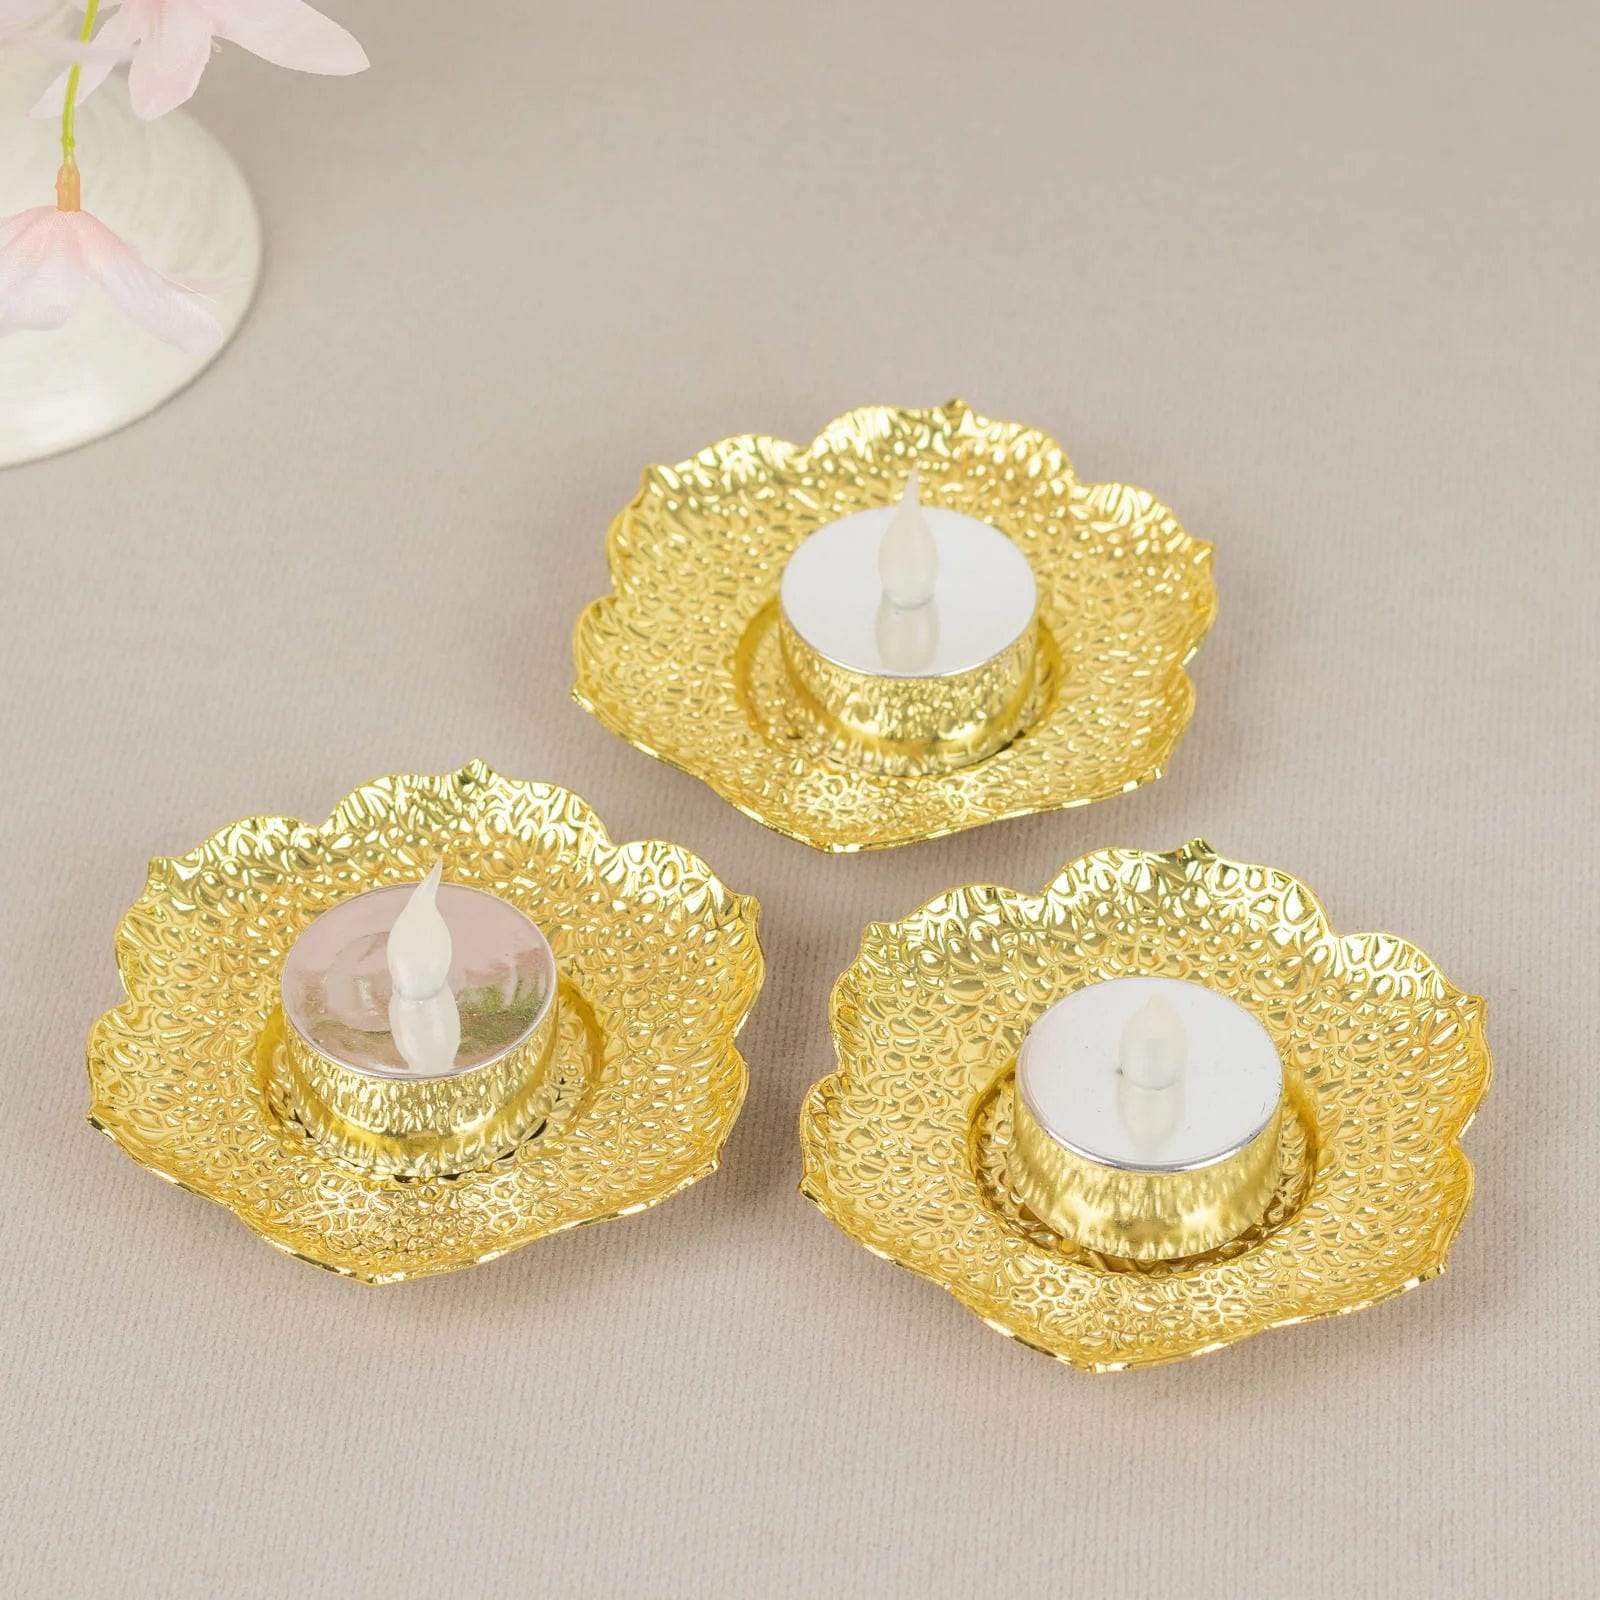 3 Metal 5 in Plum Blossom Votive Candle Holders Centerpieces